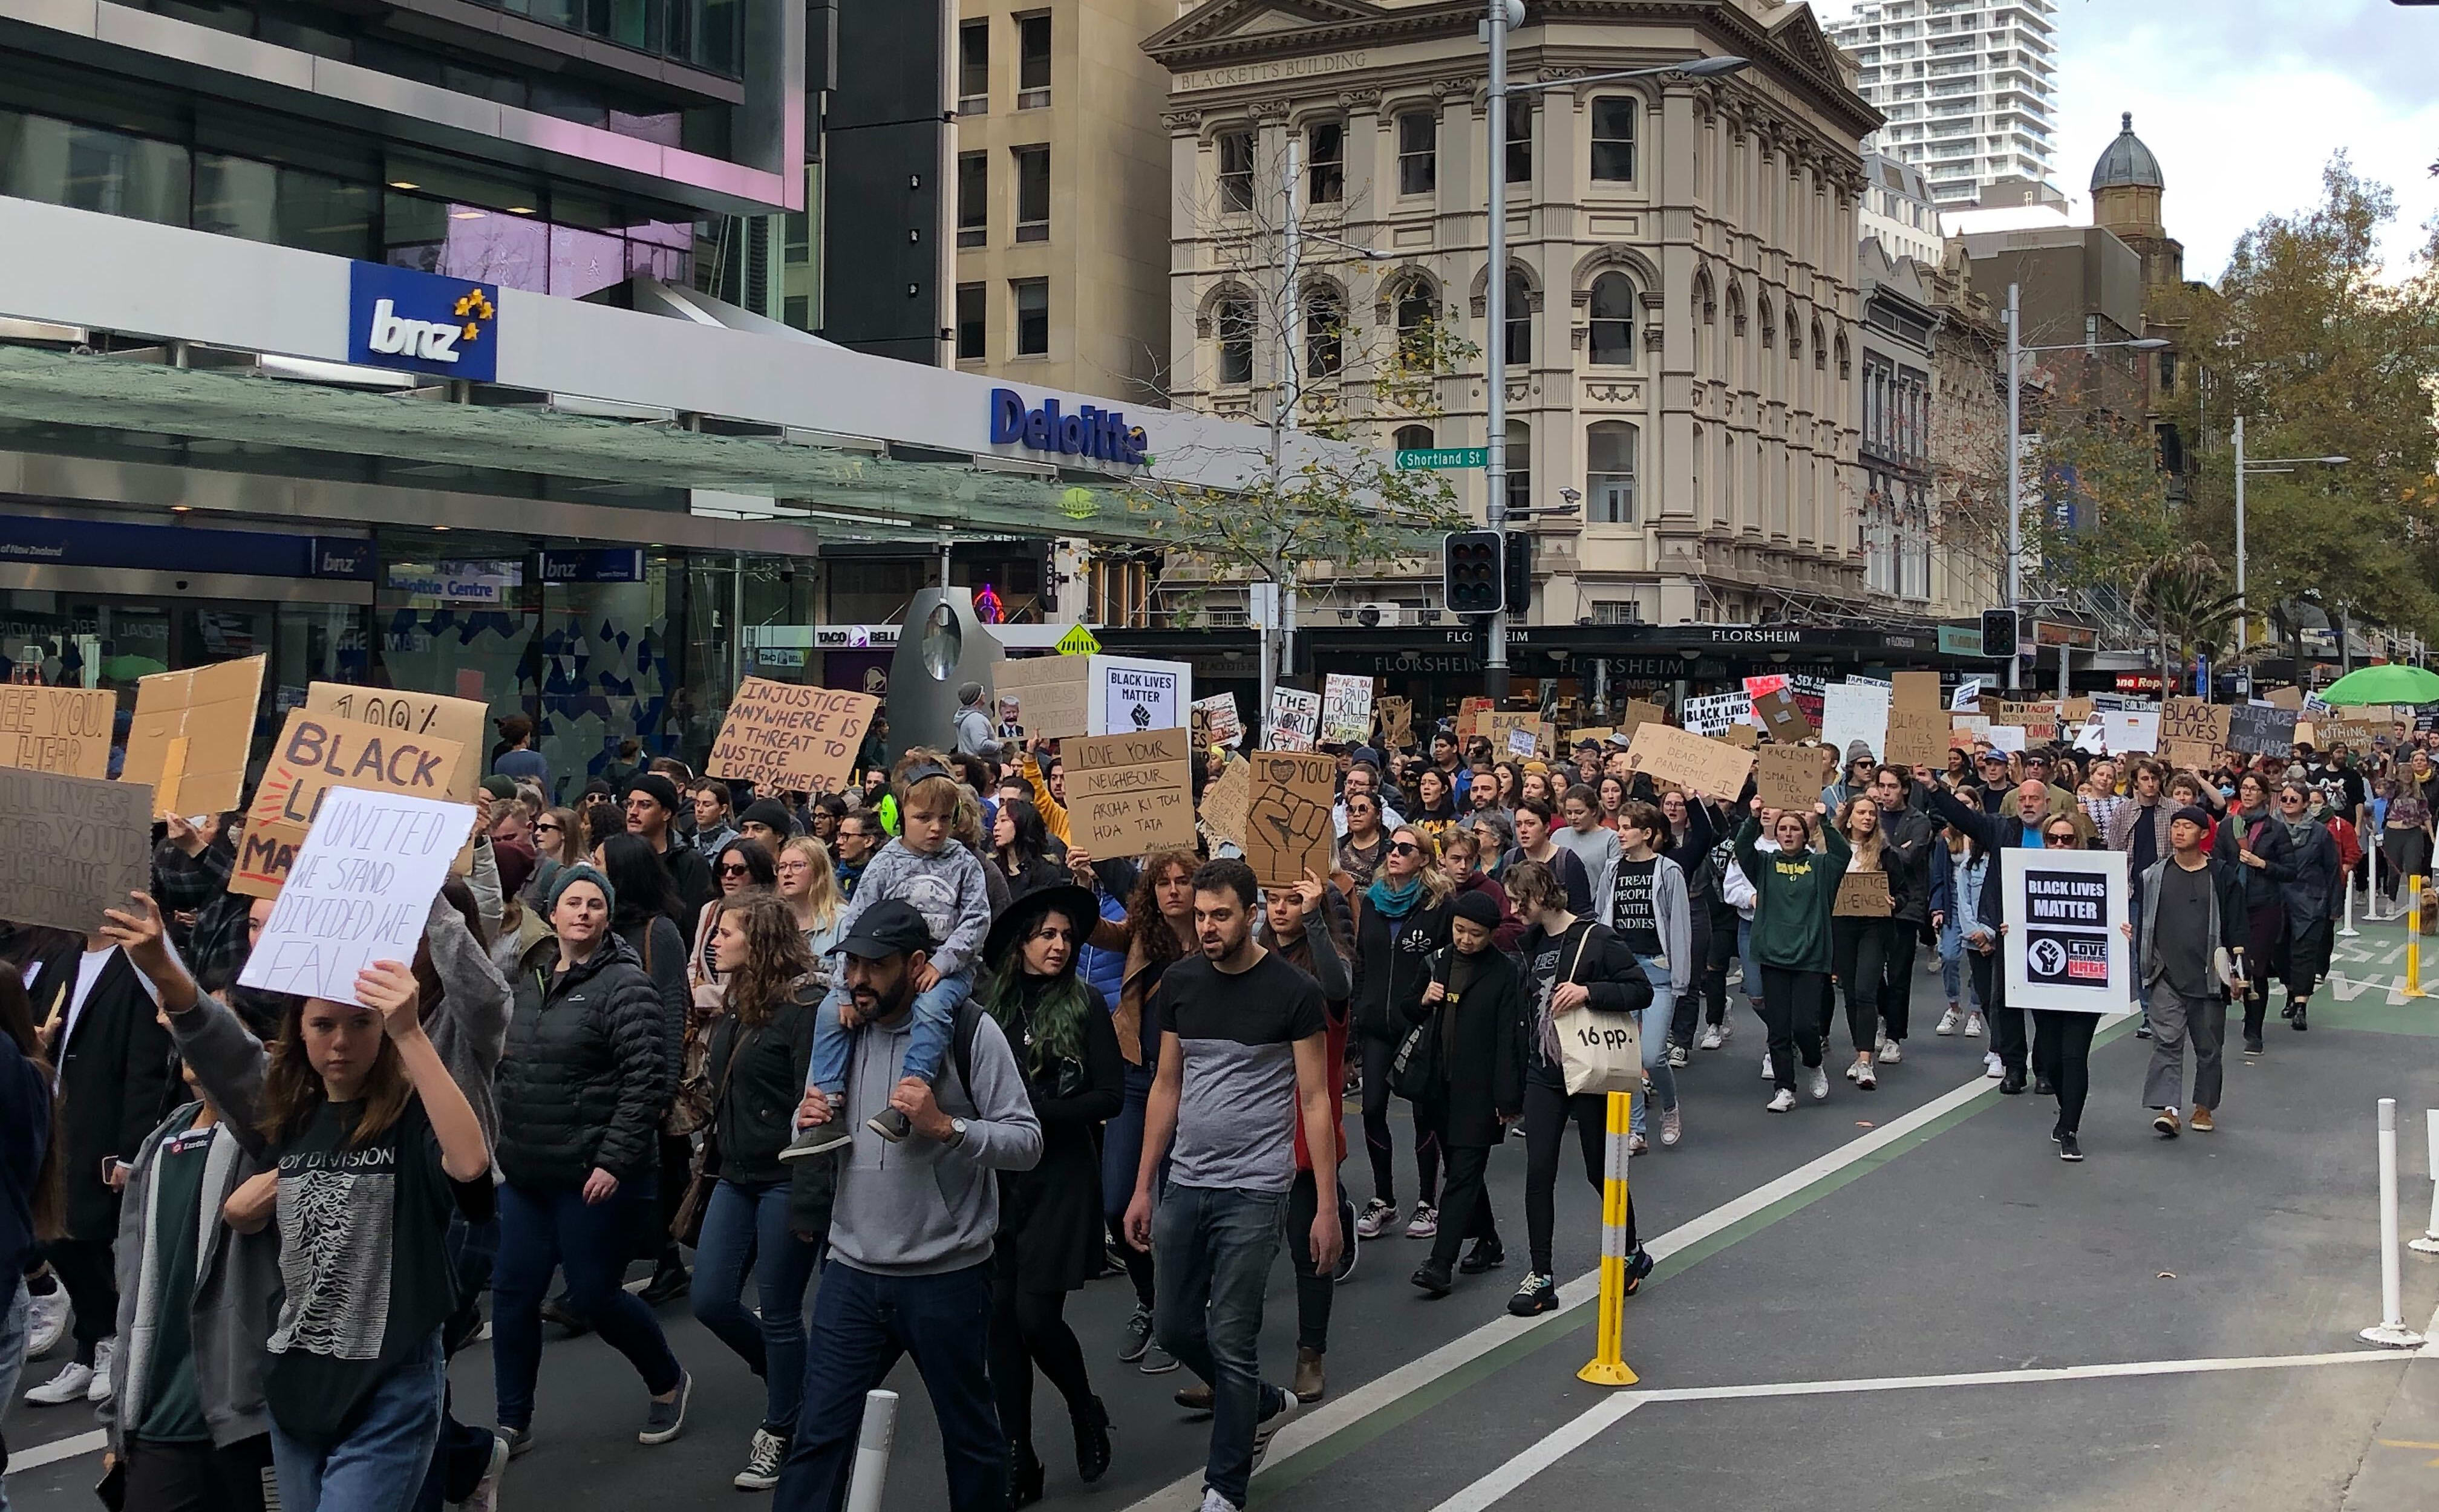 The Black Lives Matter protesters make their way down Queen Street in Auckland.